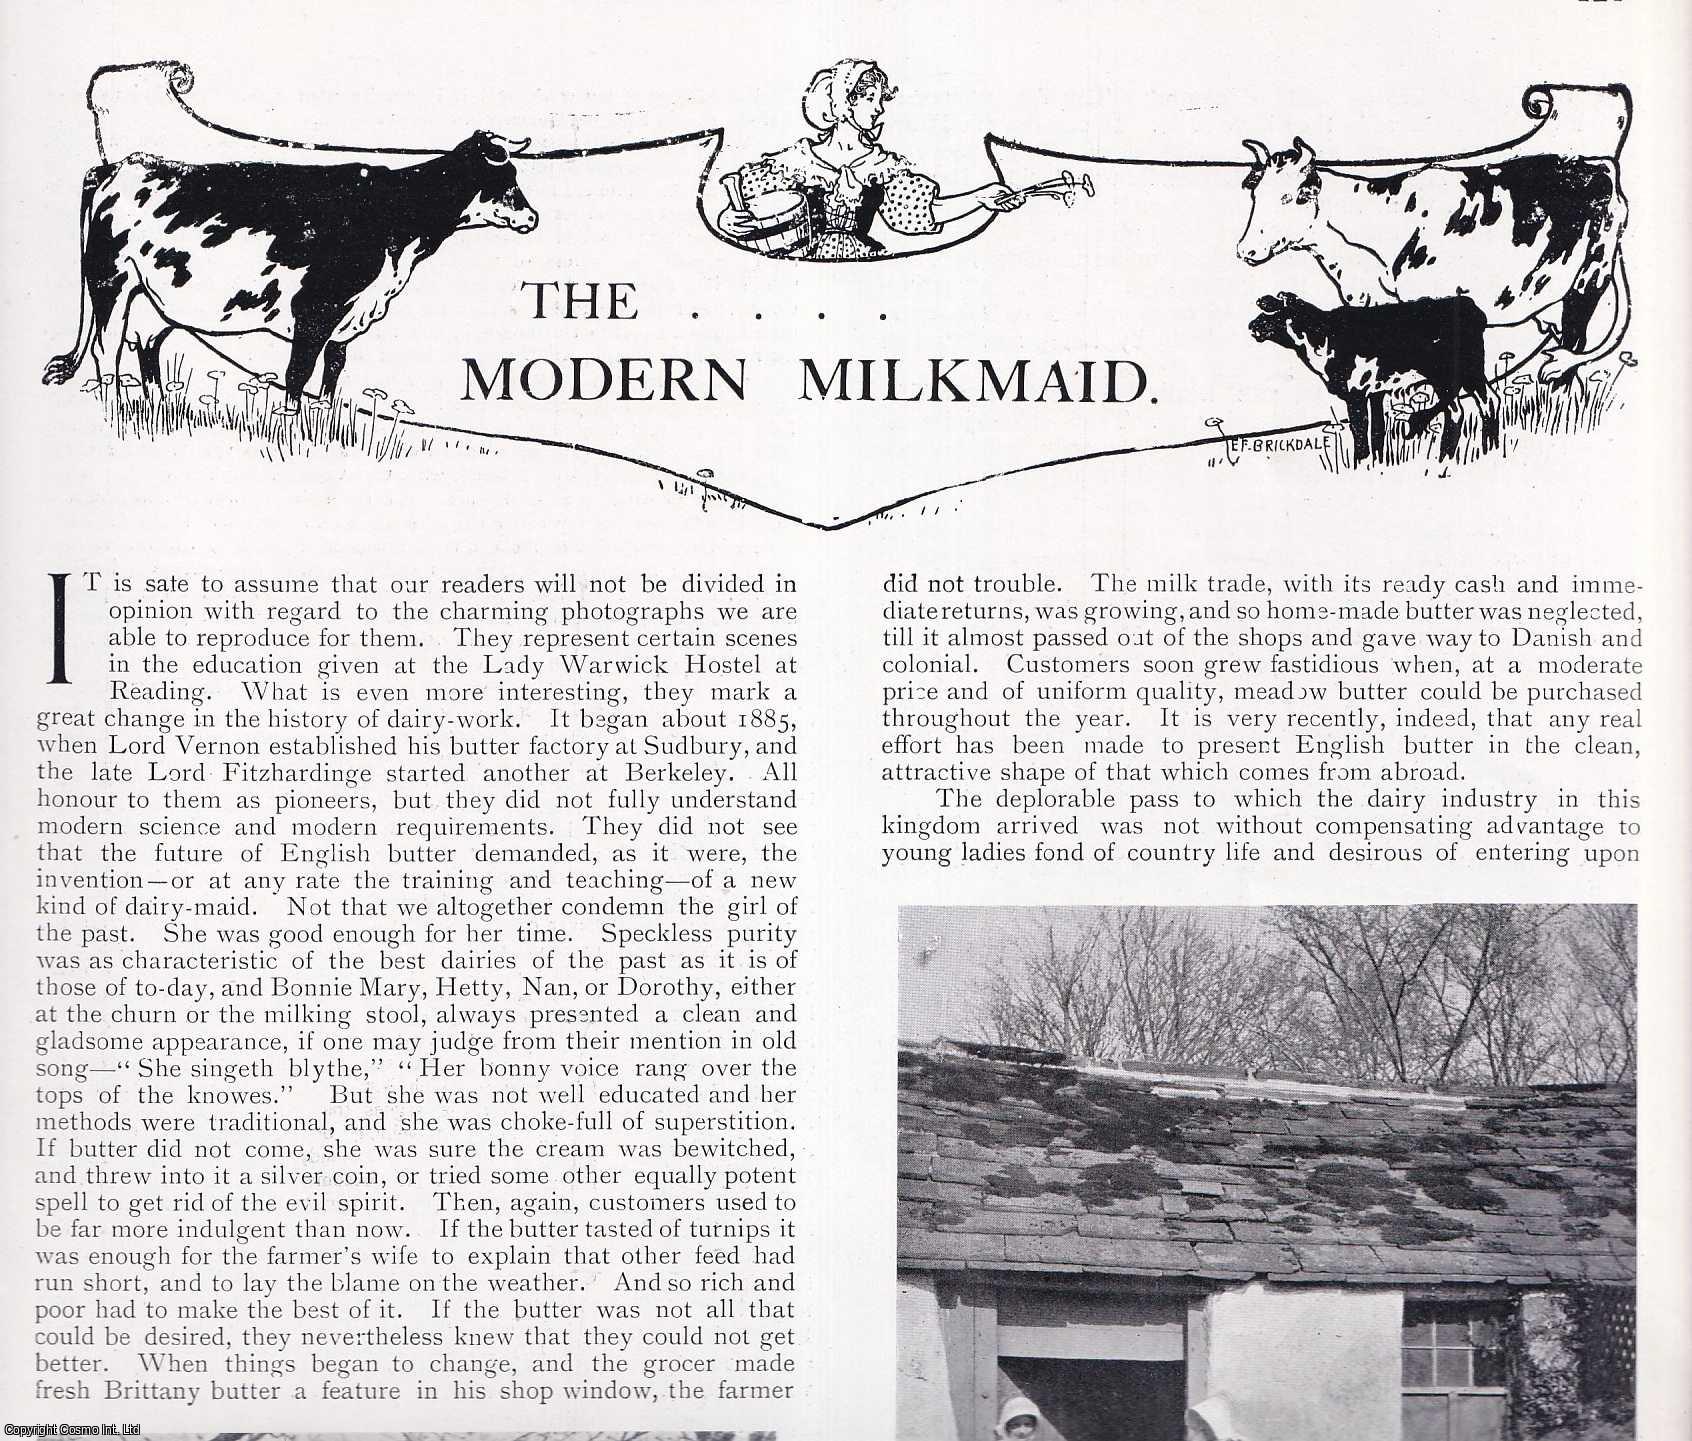 COUNTRY LIFE - The Modern Milkmaid. Several pictures and accompanying text, removed from an original issue of Country Life Magazine, 1900.